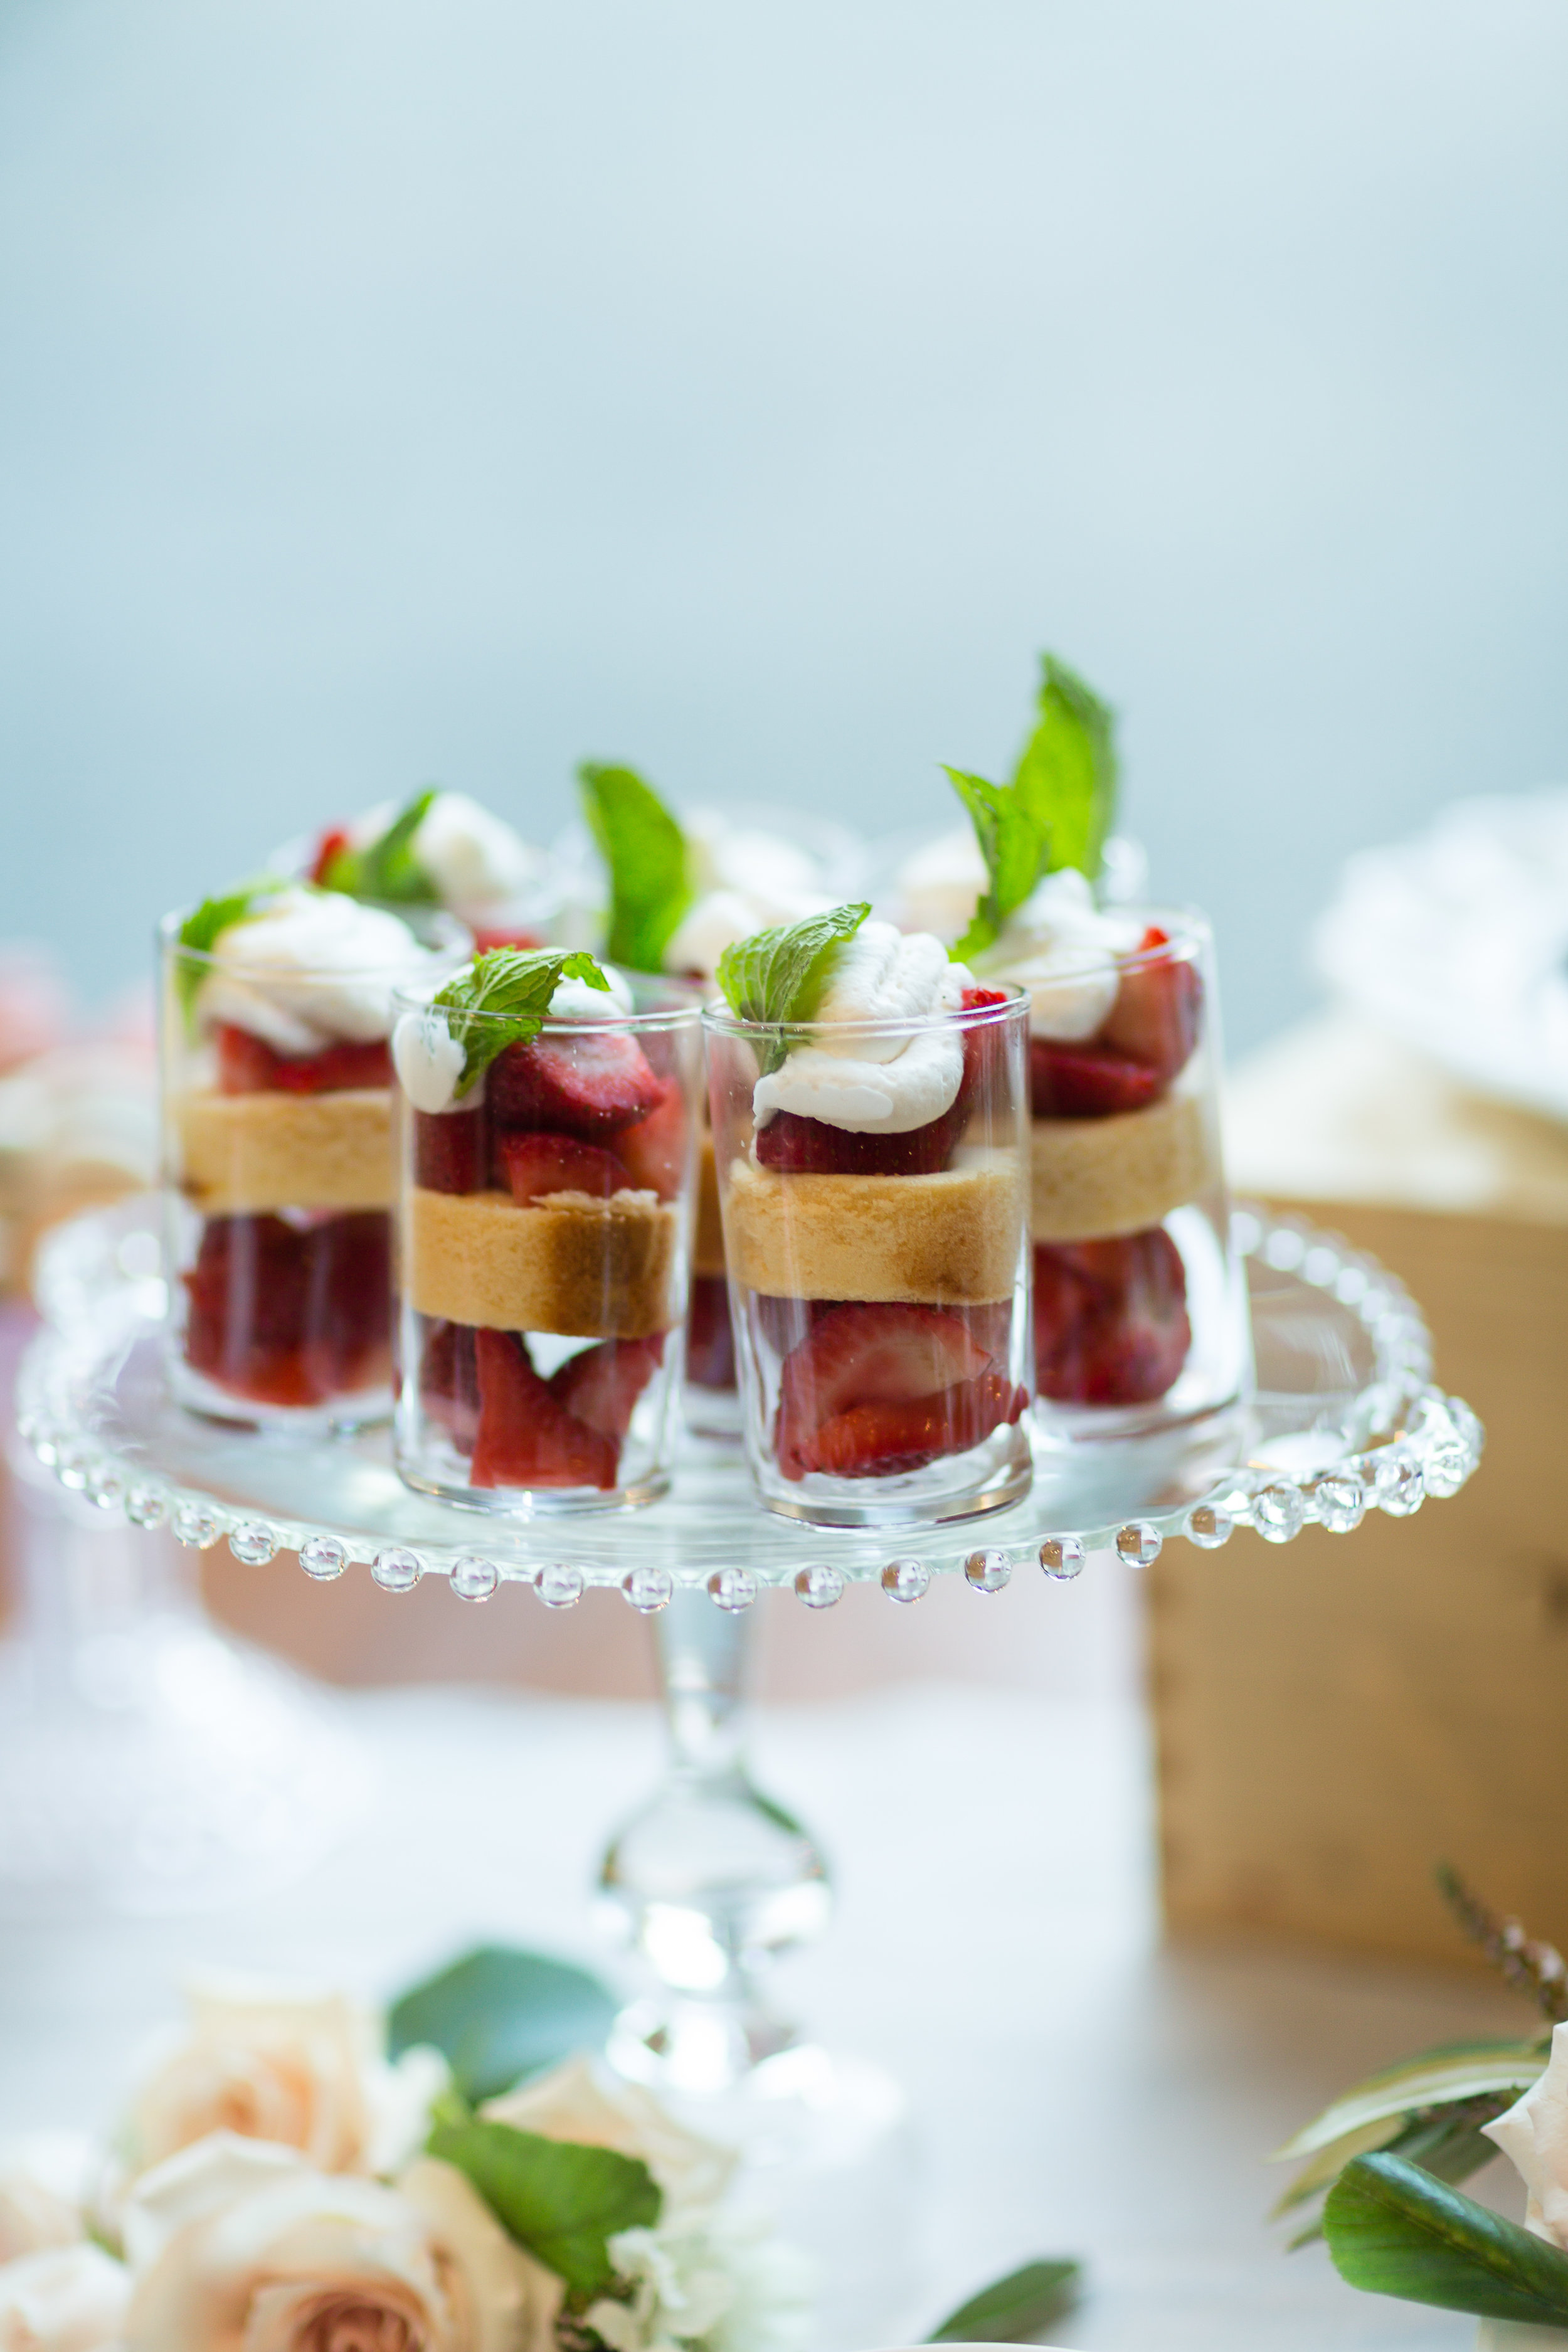 Strawberry Shortcake dessert by Farm to Table Catering